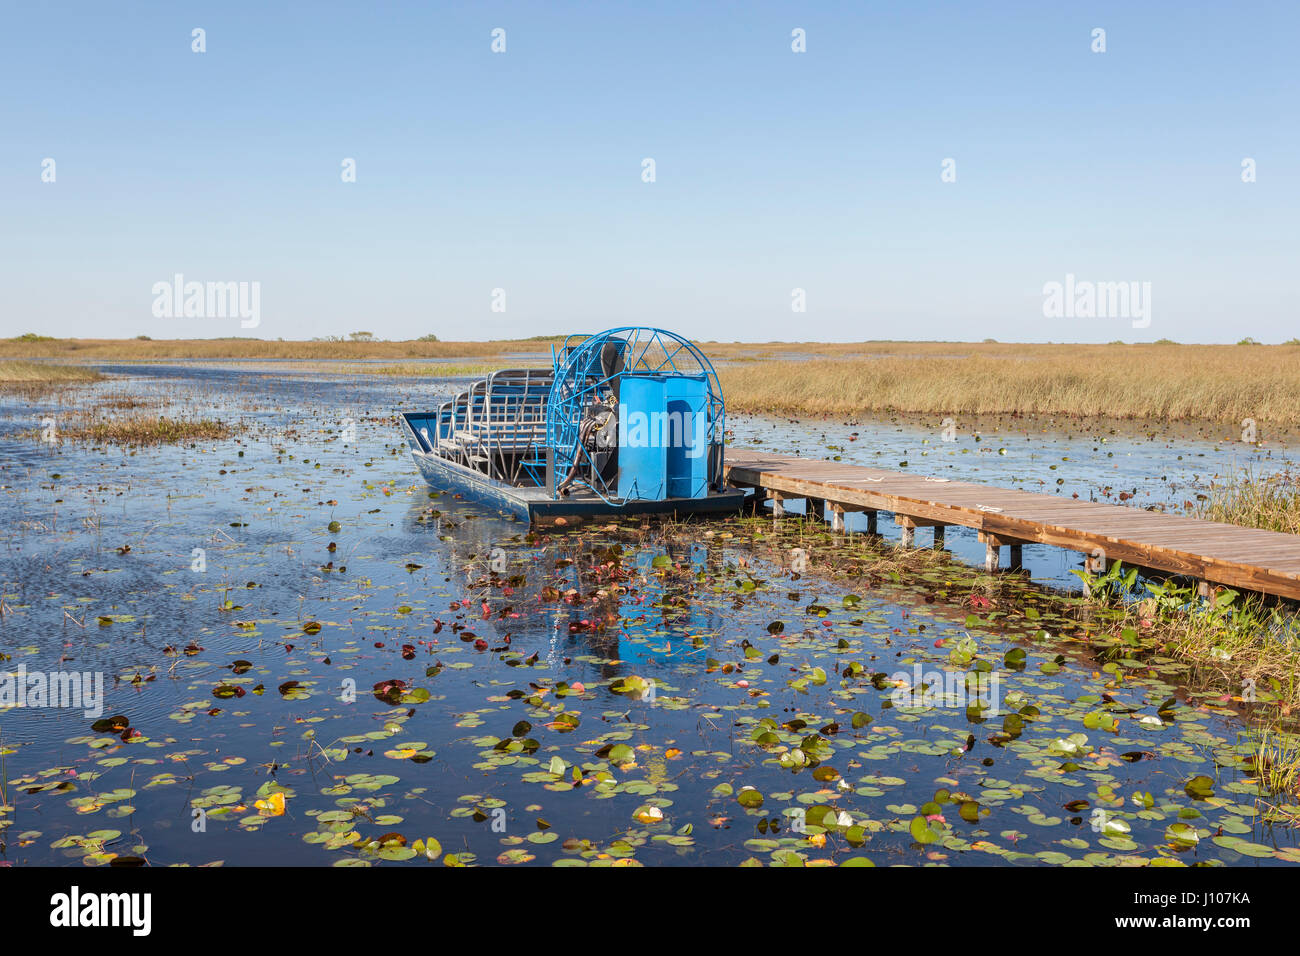 Airboat at a jetty in the Everglades National Park. Florida, United States Stock Photo